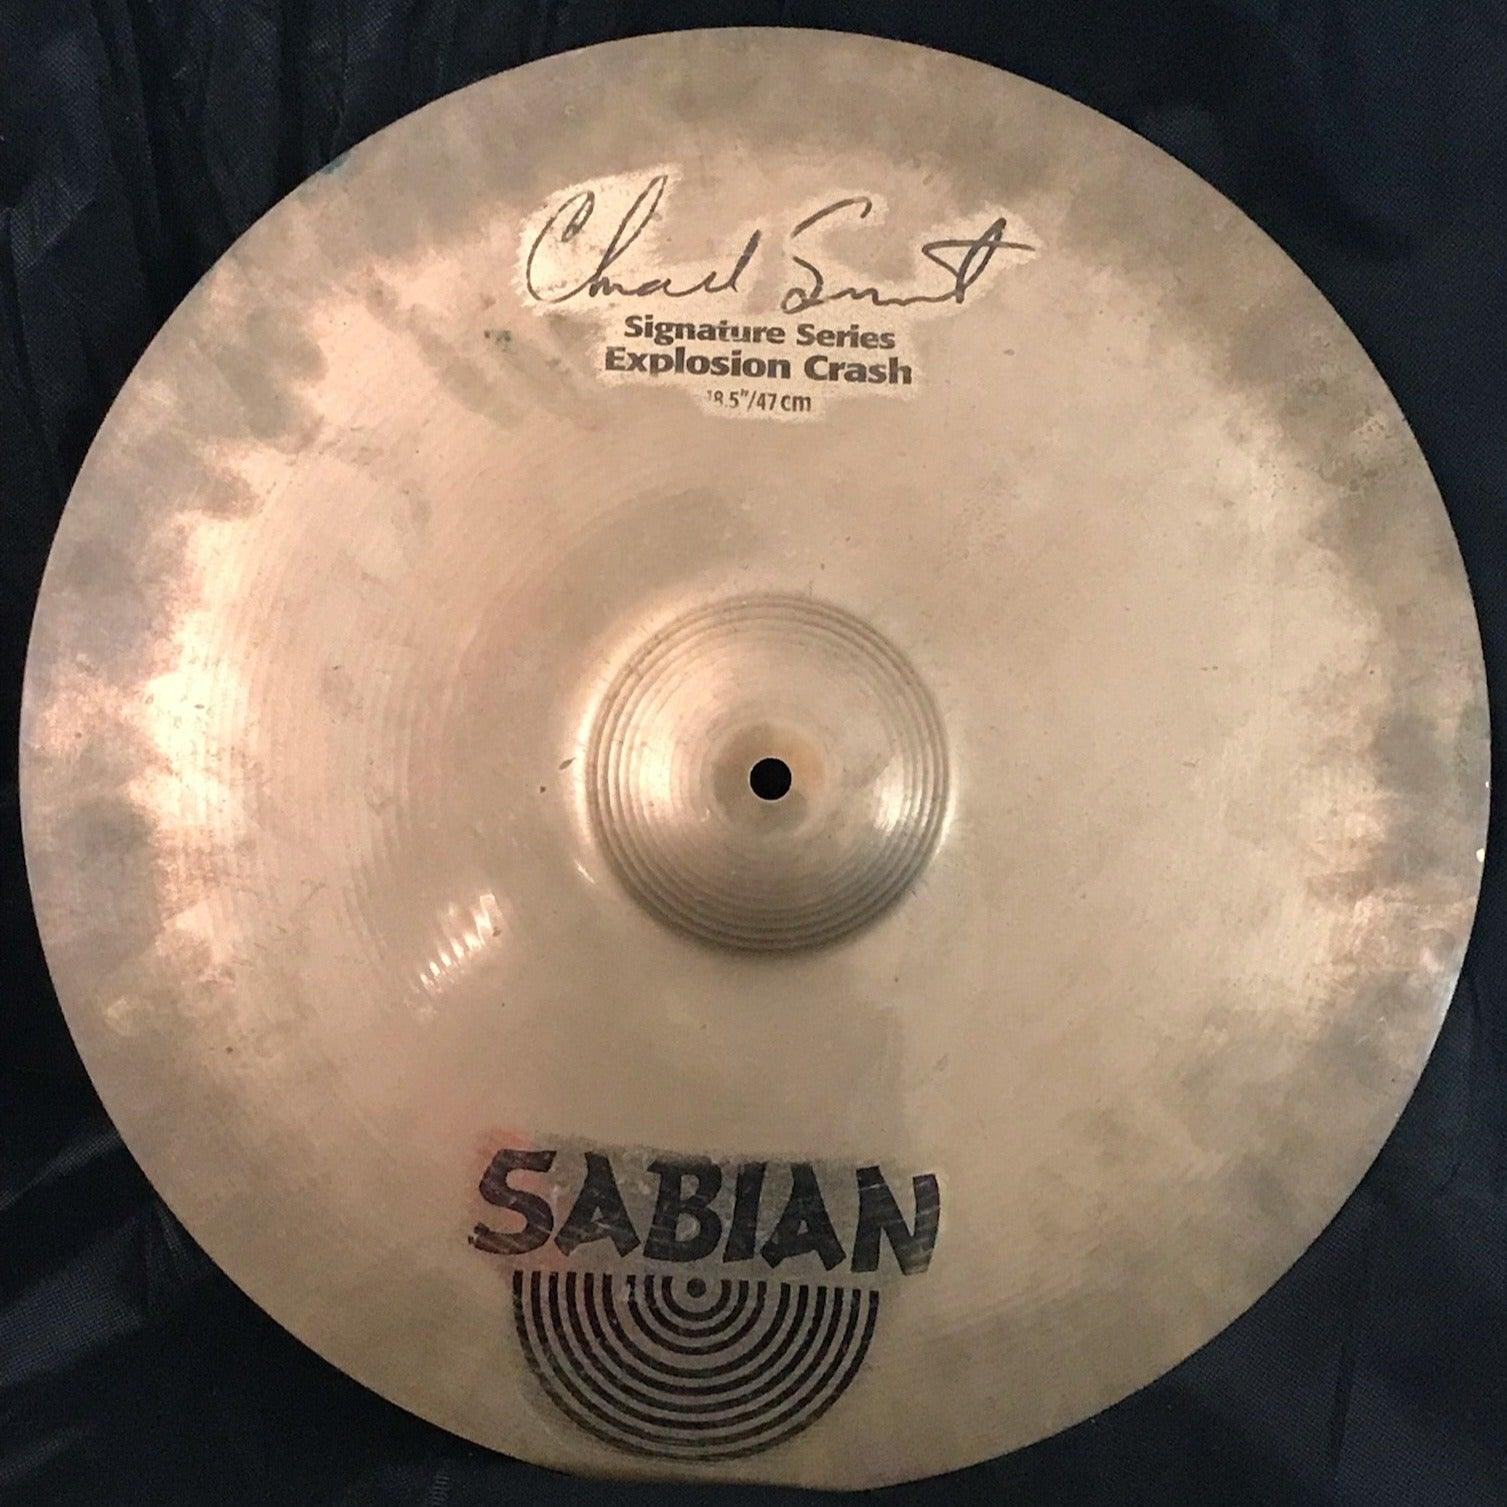 Secondhand Sabian Signature Series Chad Smith 18.5inch Explosion Crash - Muso's Stuff